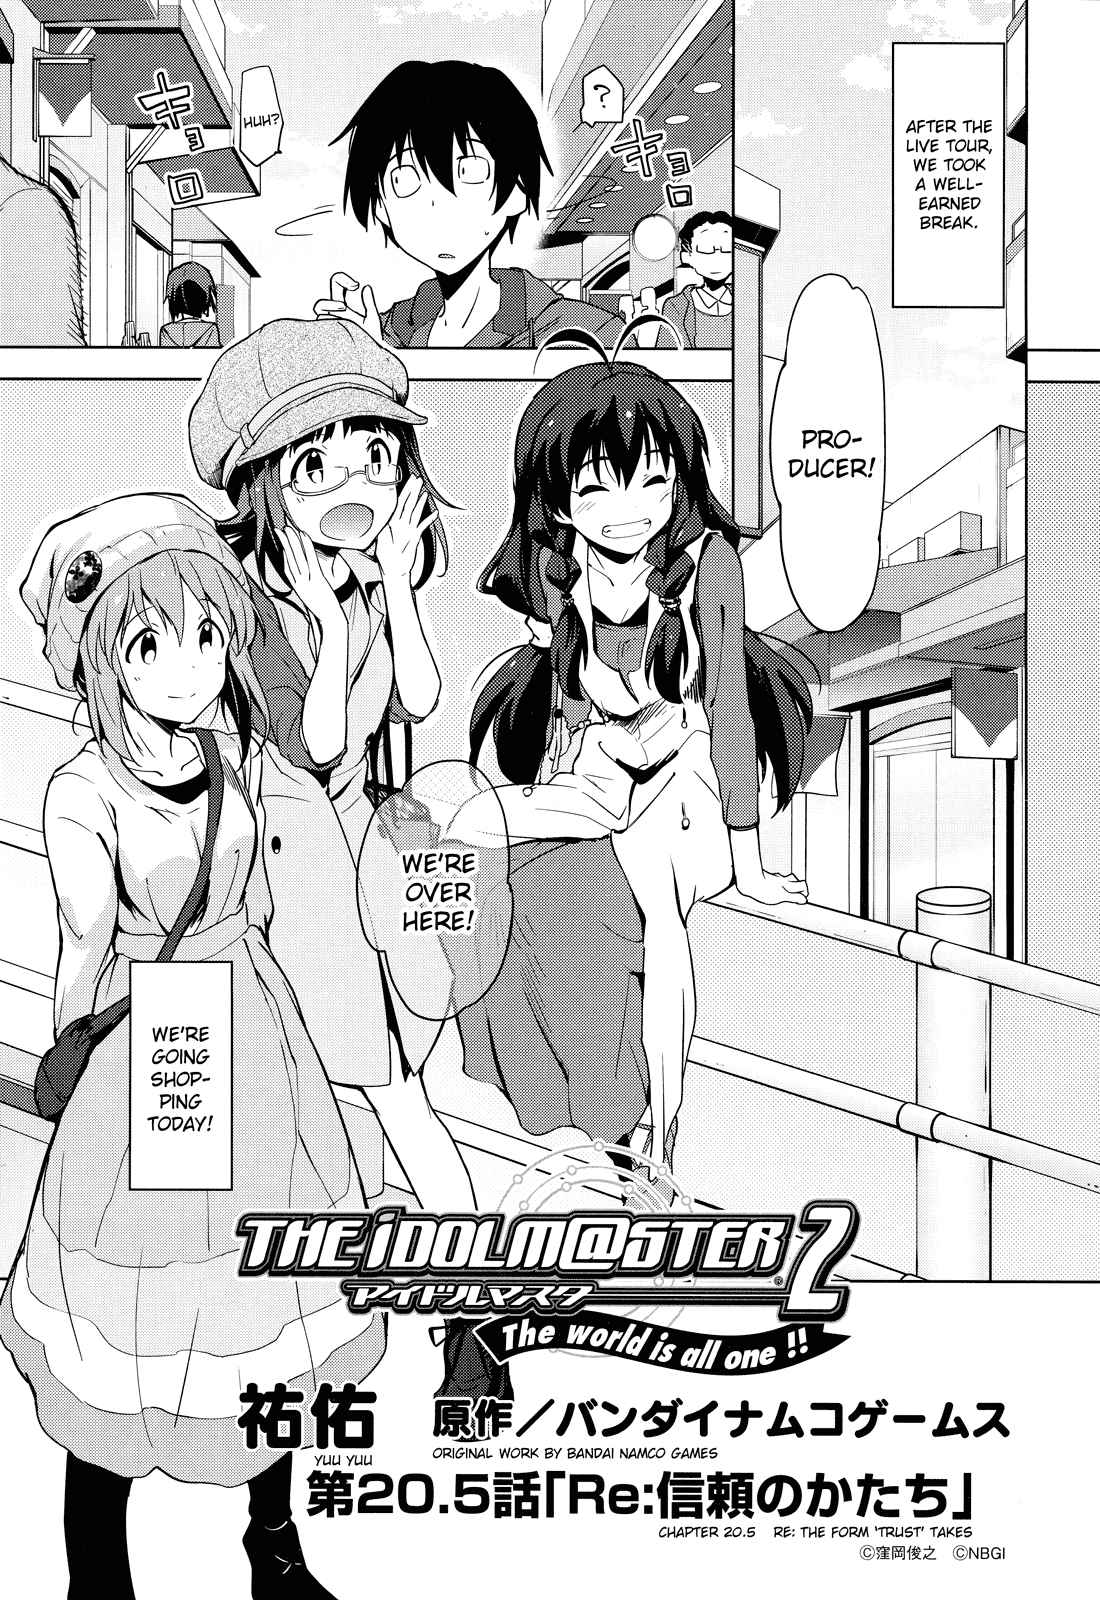 THE iDOLM@STER 2 The world is all one!! Vol. 3 Ch. 20.5 Re